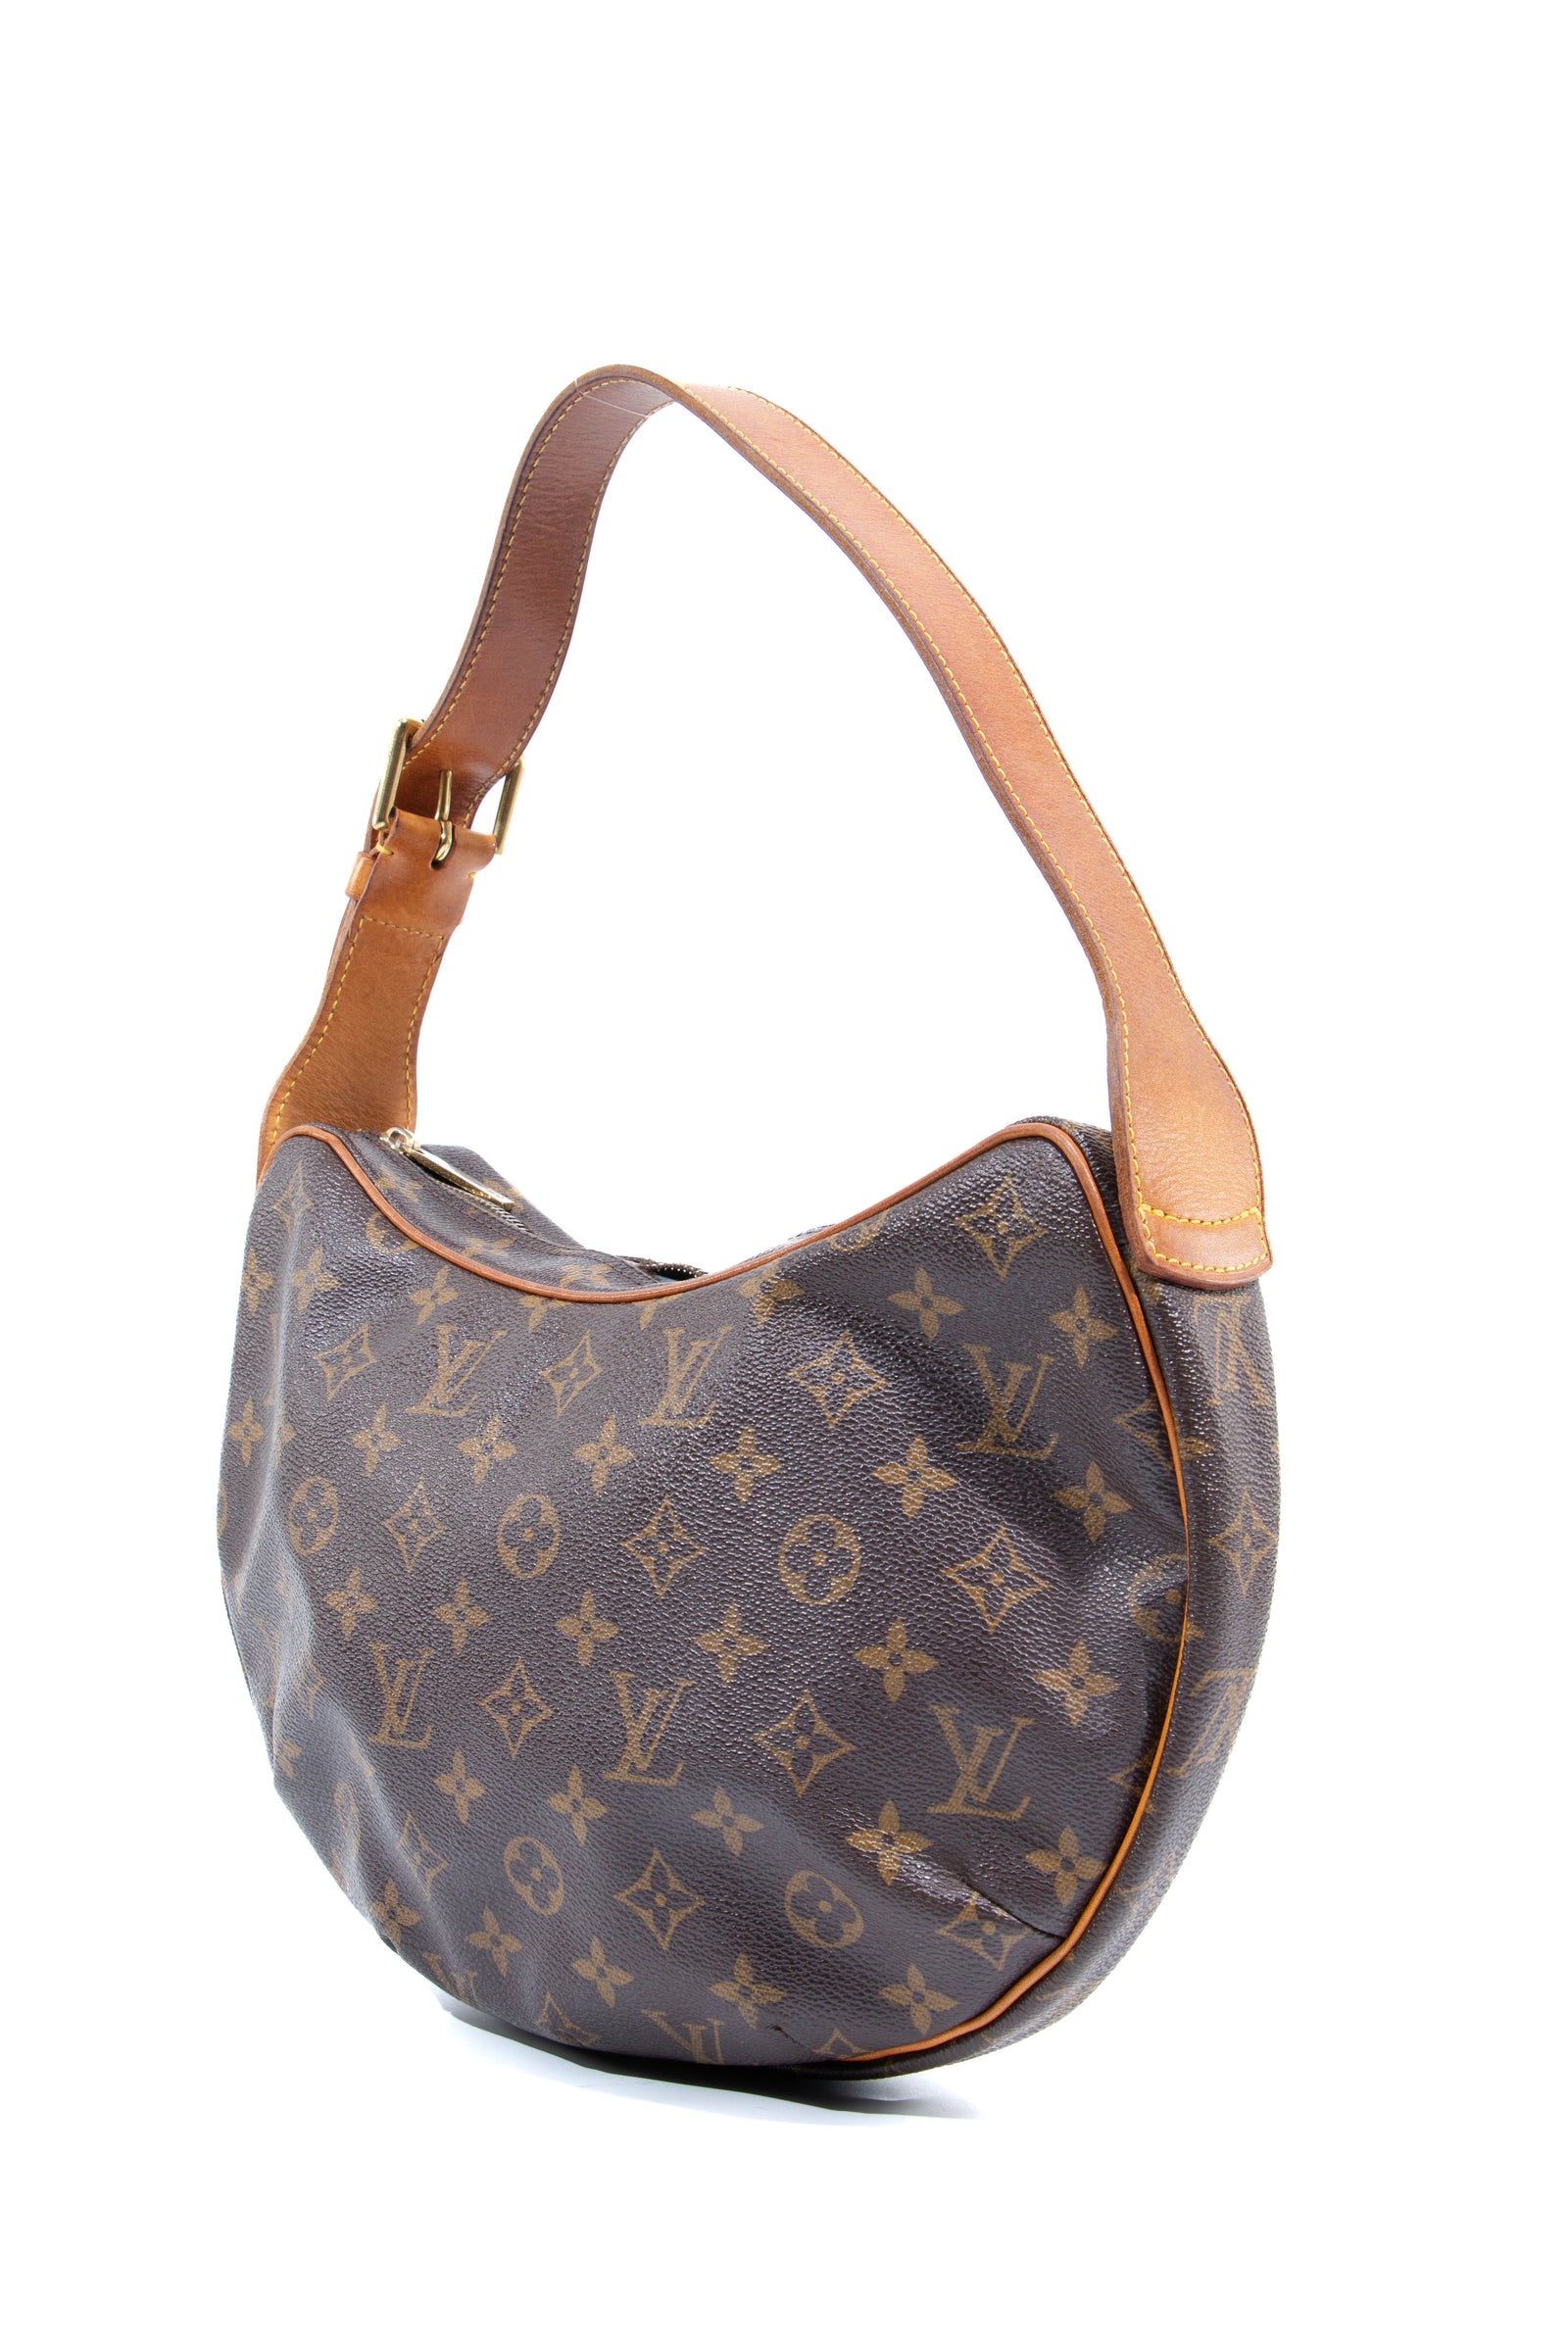 LOUIS VUITTON, YELLOW MONOGRAM KEEPALL BANDOULÍÈRE 50 IN EMBROIDERED MESH  AND LEATHER WITH SILVER TONE HARDWARE, Handbags & Accessories, 2020